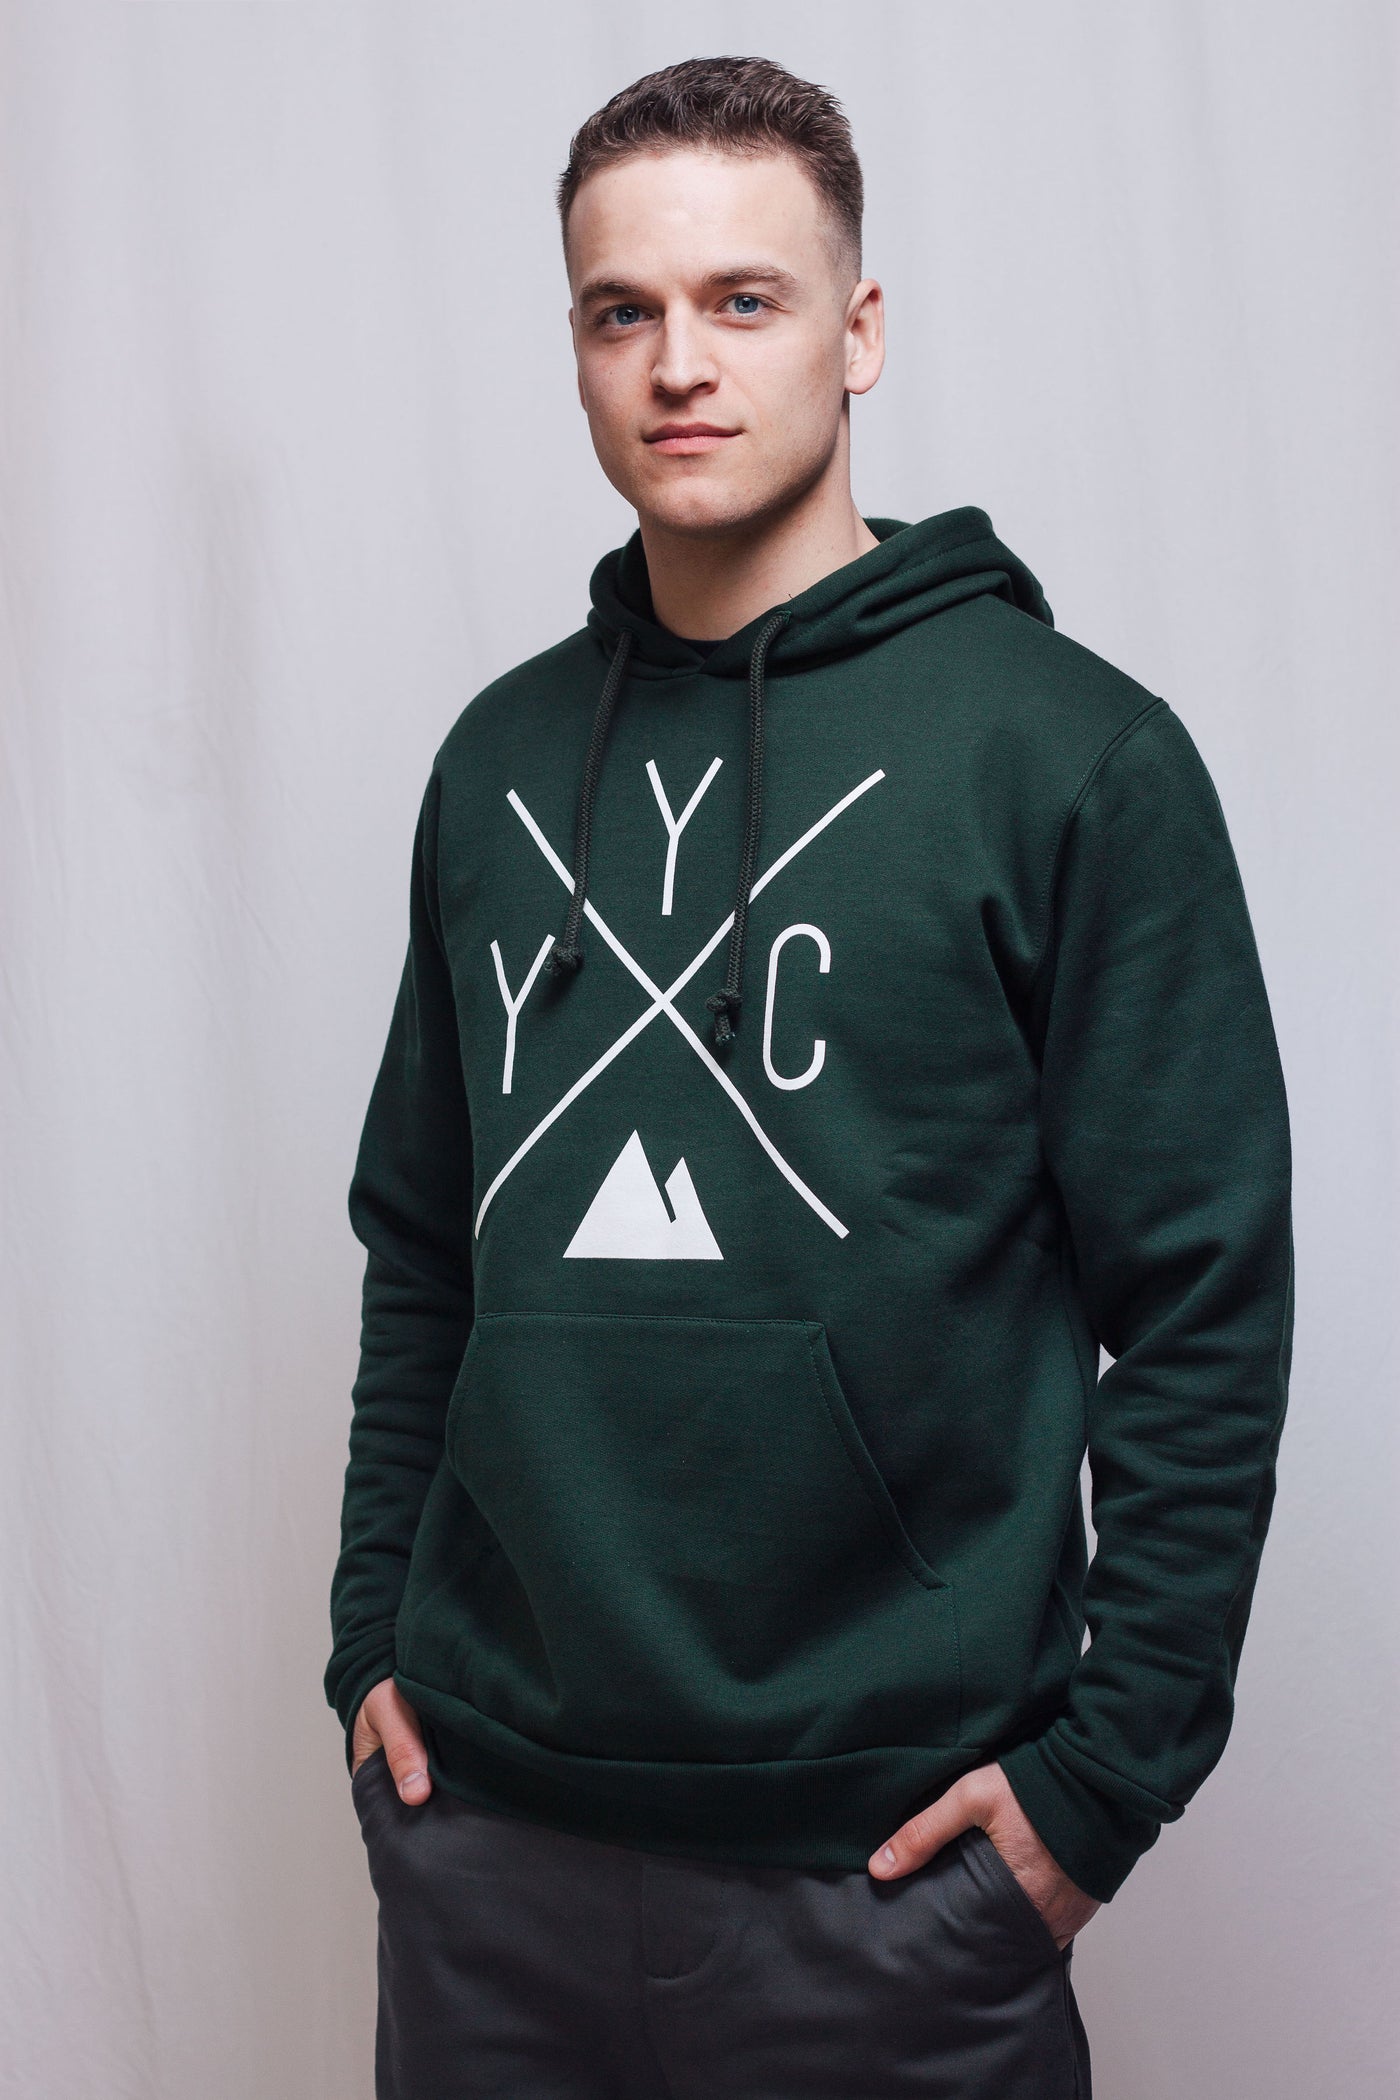 Individual wearing forest green YYC Hoodie. The individual is painting this hoodie with charcoal trousers. Made in Canada, sustainably.